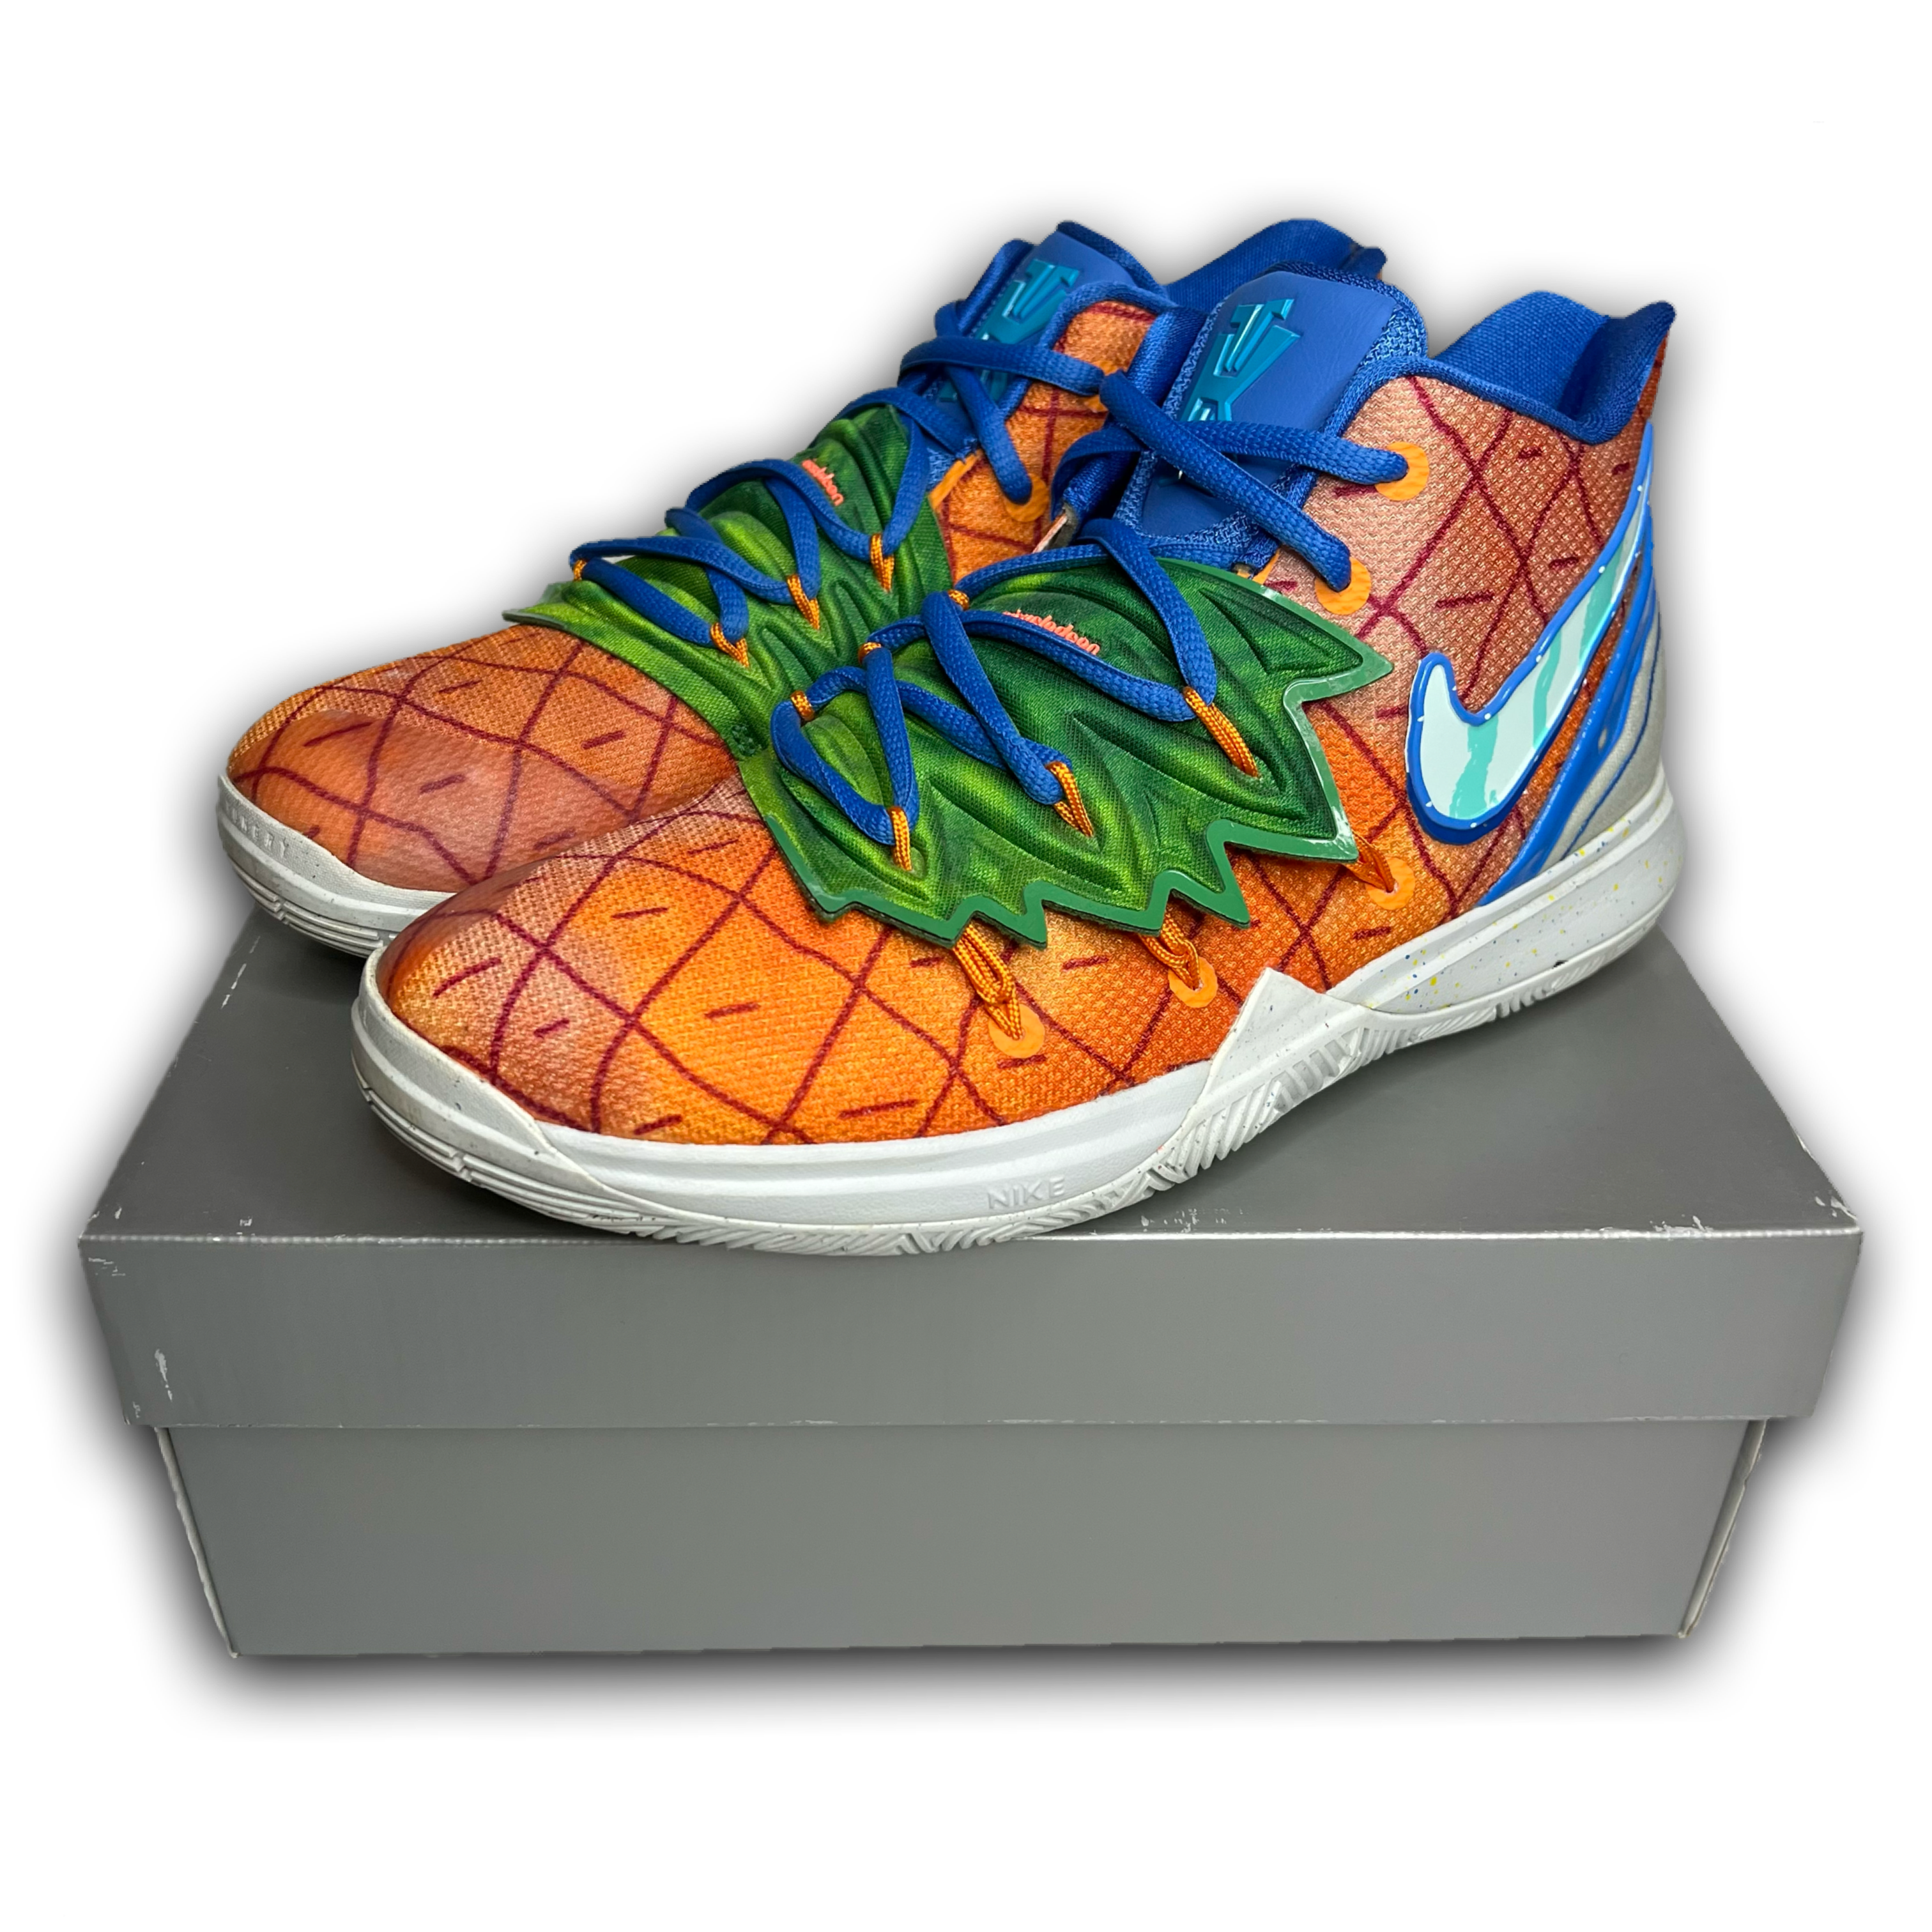 Nike Kyrie 5 “Pineapple House” (Size 7Y)